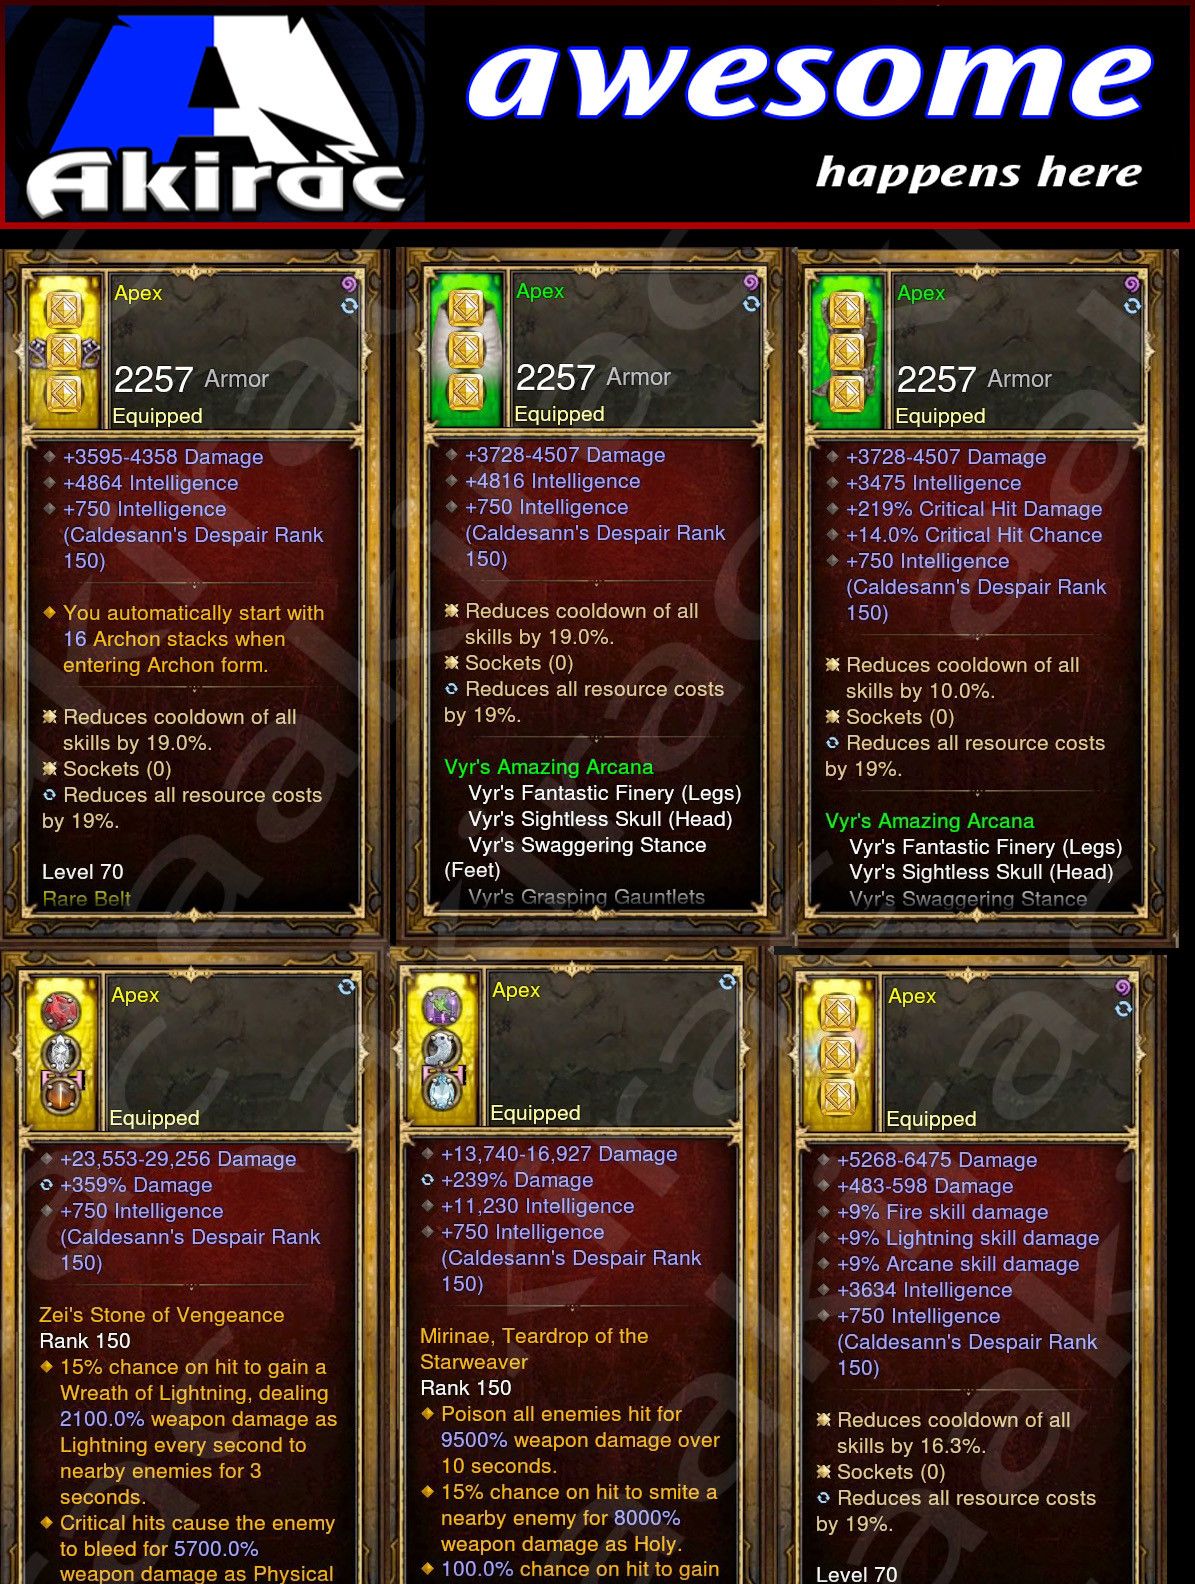 Diablo 3 Immortal v1 Vyrs Wizard Set for Rift 80-130 Apex Diablo 3 Mods ROS Seasonal and Non Seasonal Save Mod - Modded Items and Gear - Hacks - Cheats - Trainers for Playstation 4 - Playstation 5 - Nintendo Switch - Xbox One